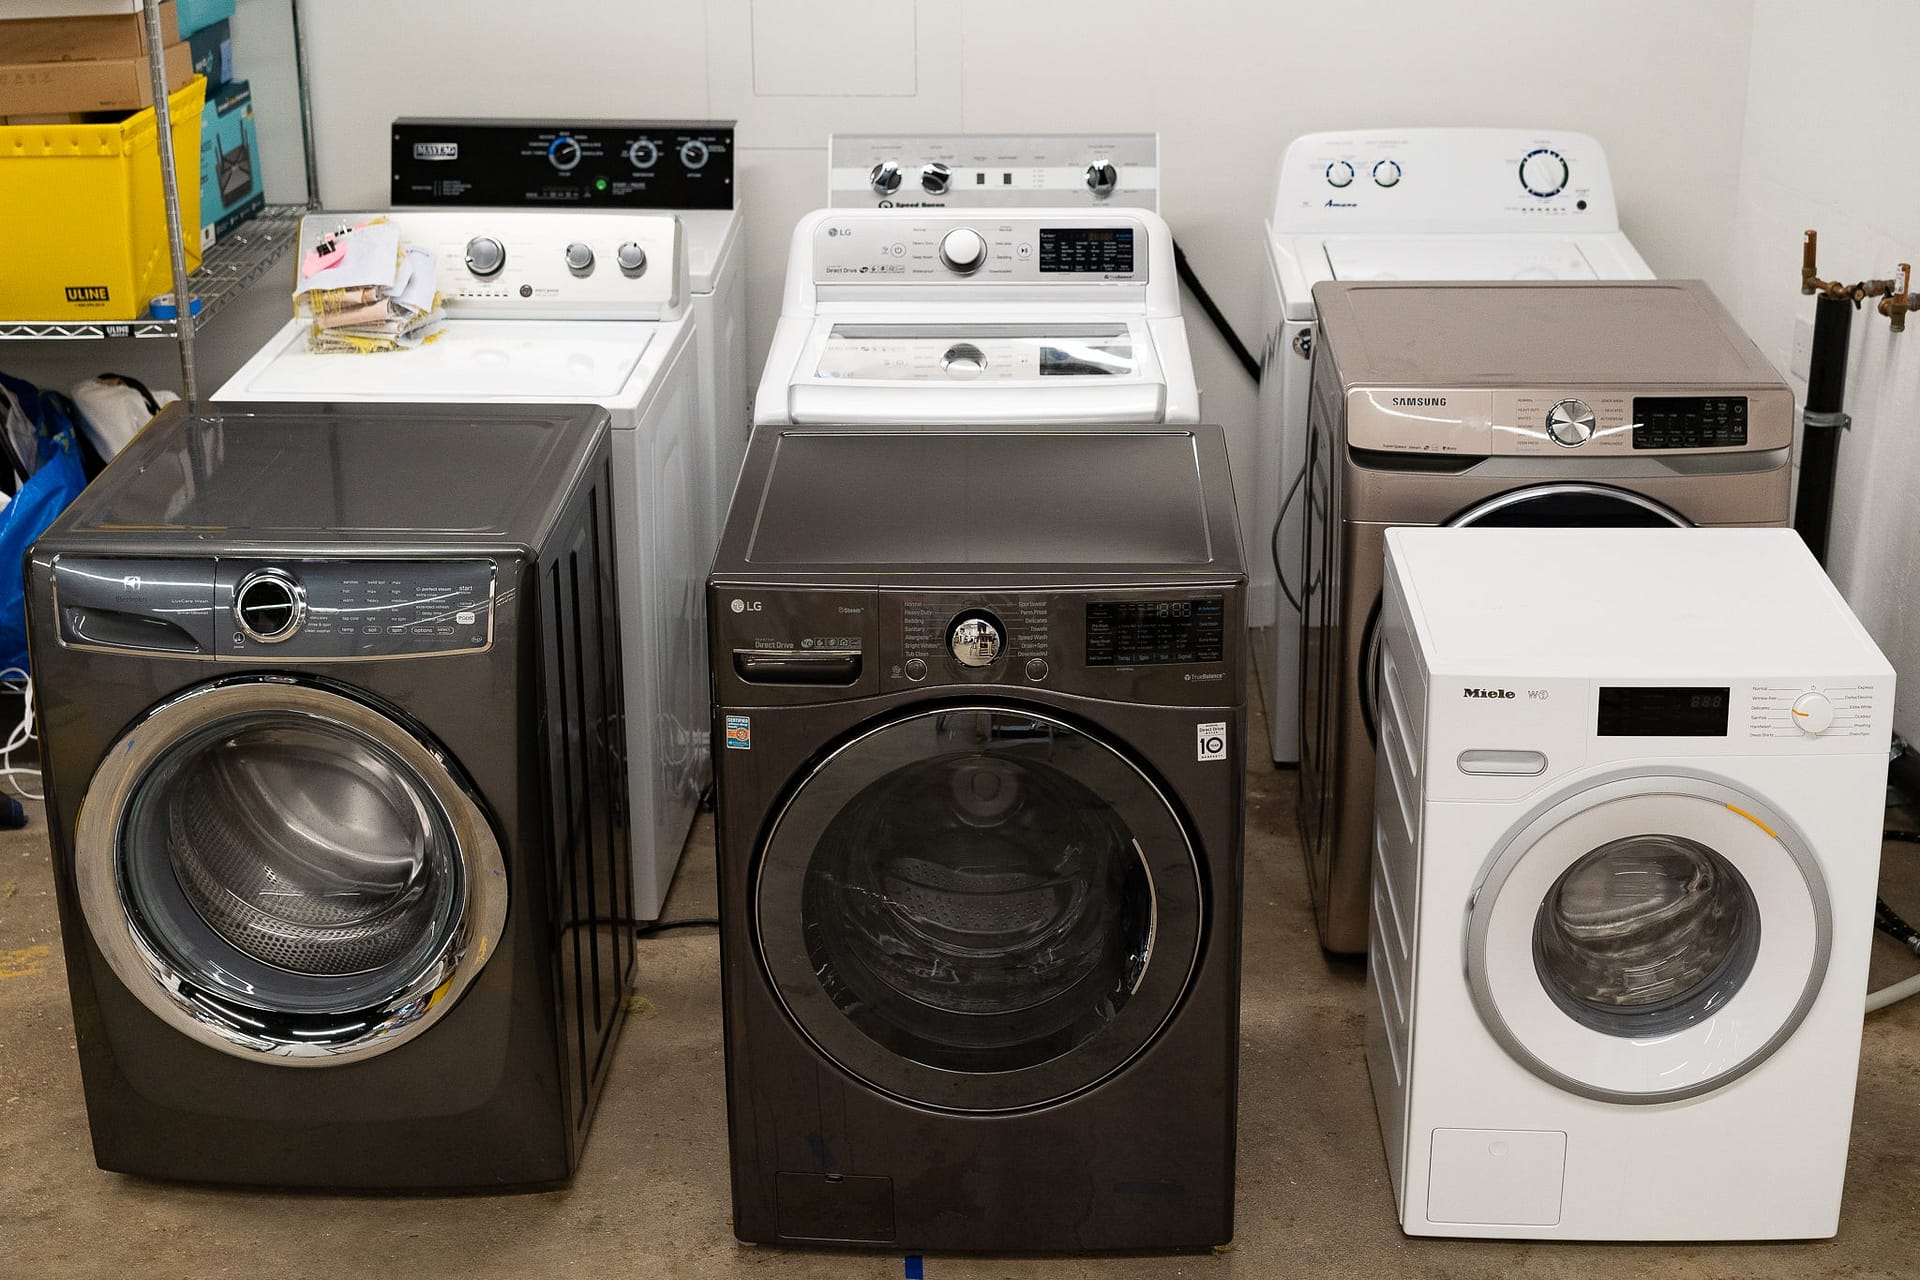 Samsung vs Maytag: Who has the best appliances in 2023?